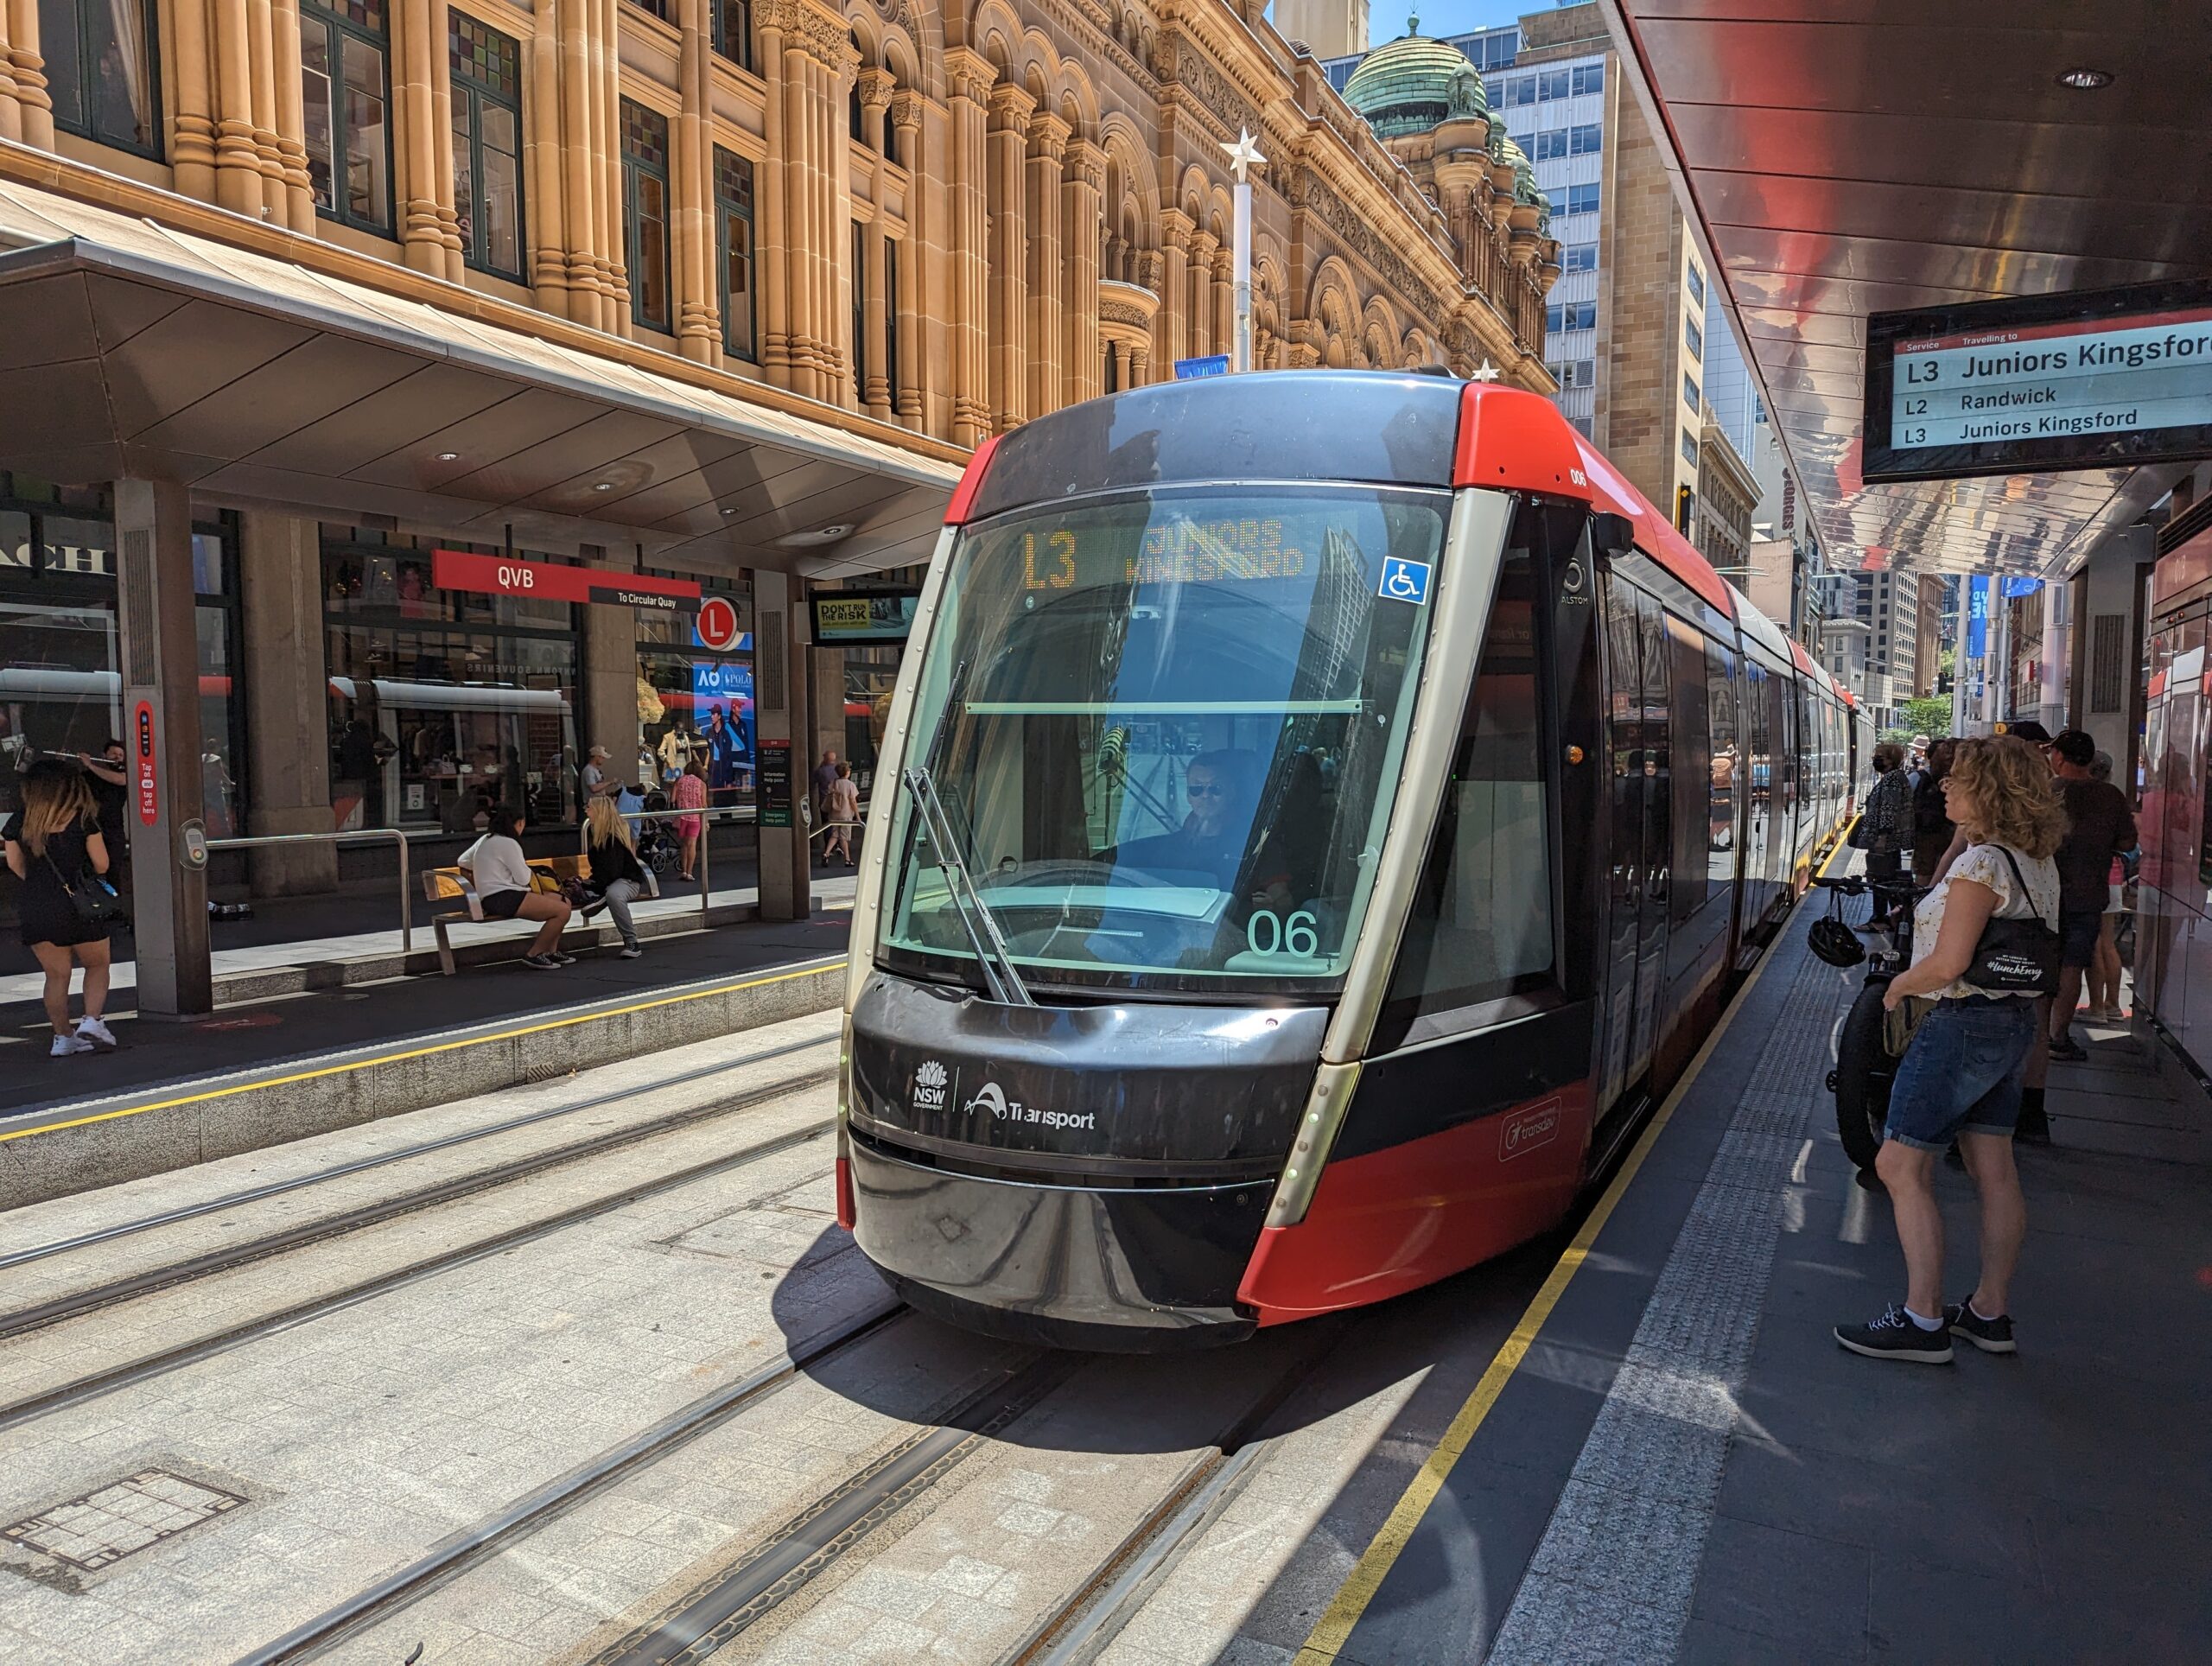 A Sydney tram outside of QVB bound for Kingsford Juniors.